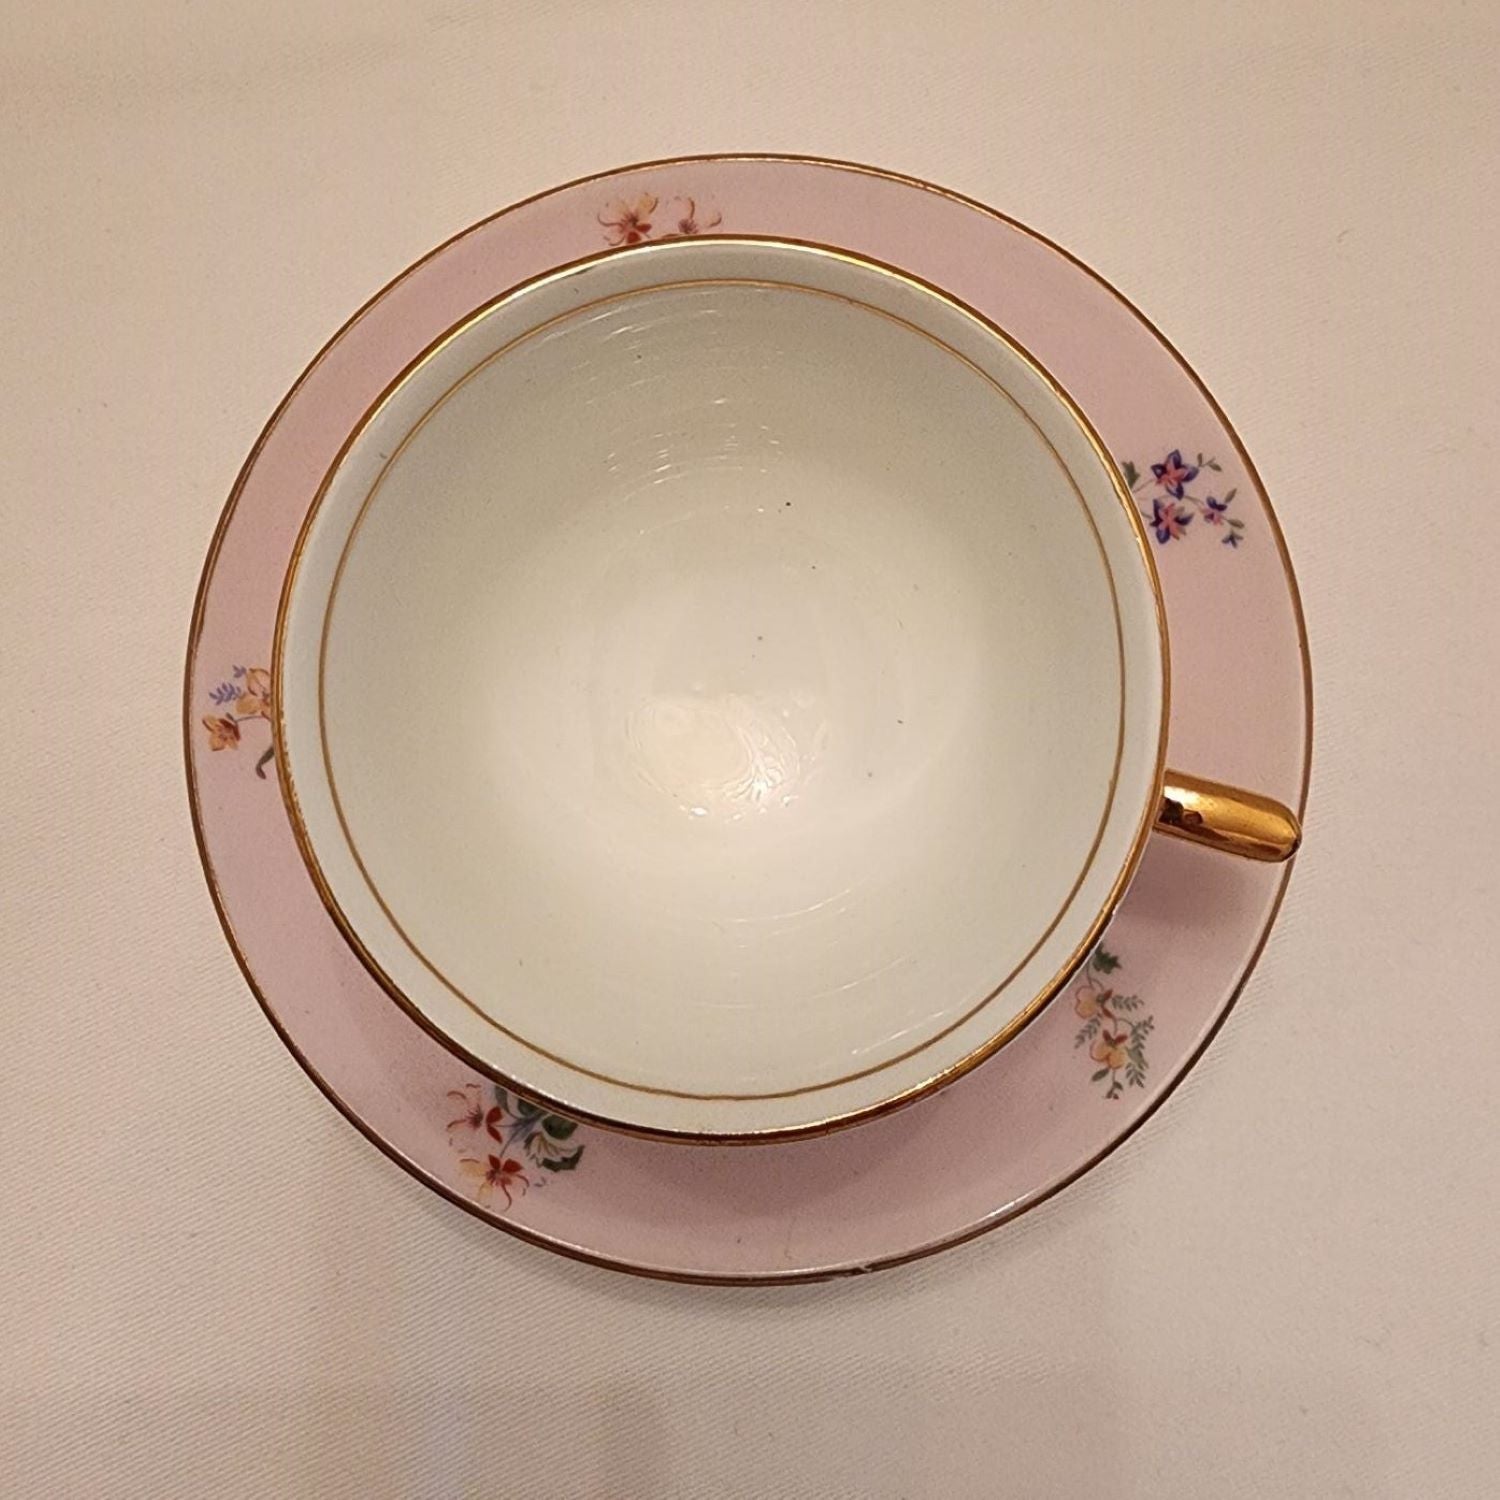 A pinkish teacup and saucer with delicate floral patterns.